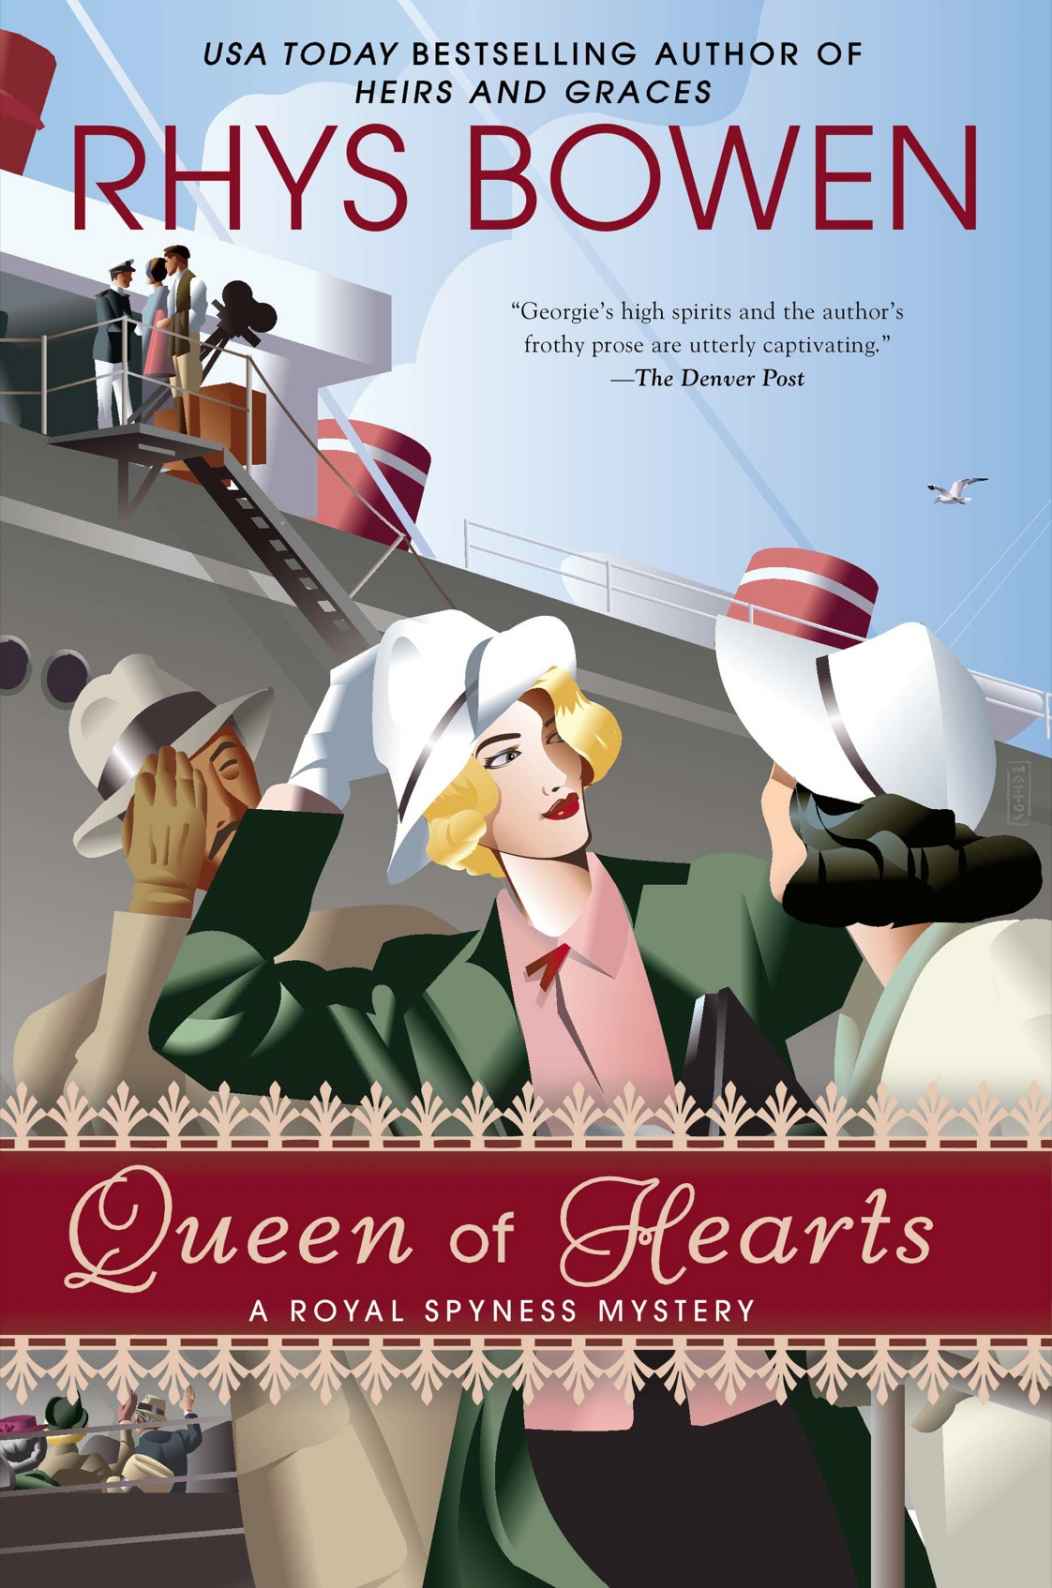 Queen of Hearts (Royal Spyness Mysteries) by Rhys Bowen